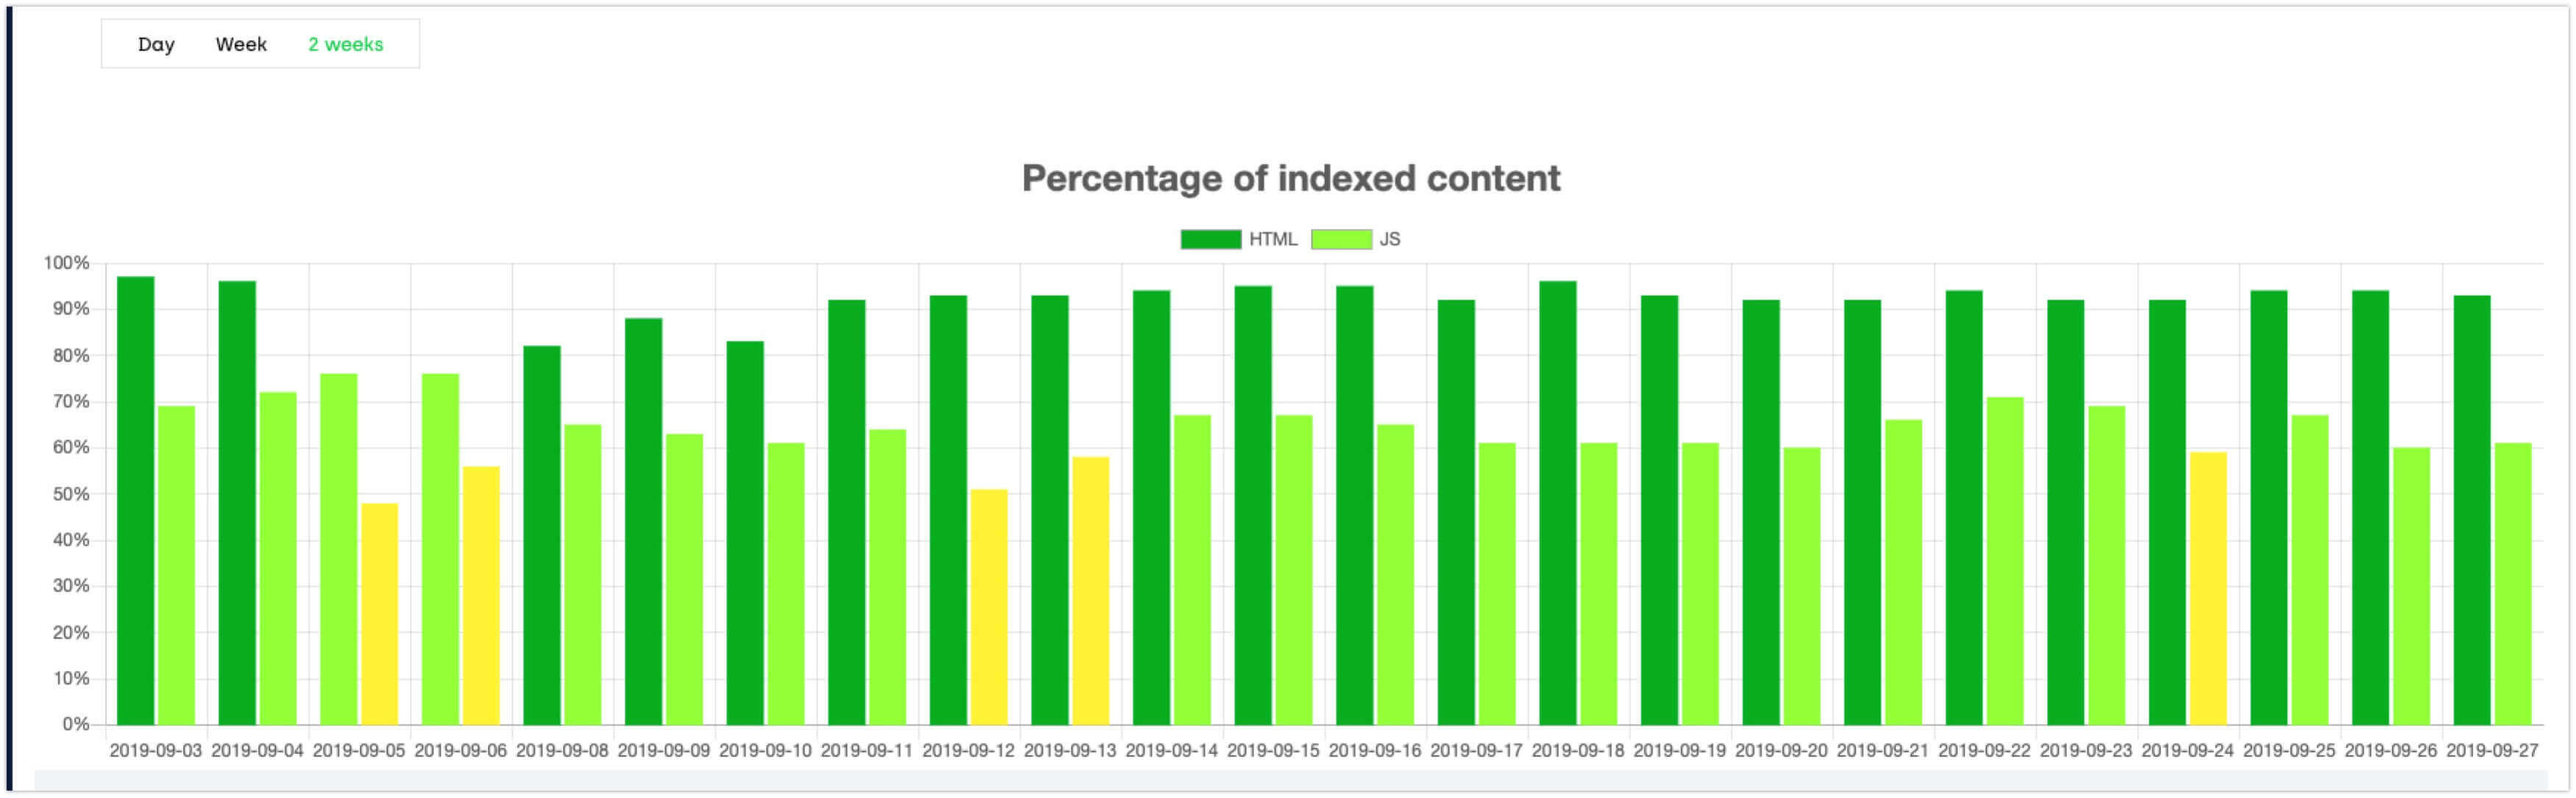 Percentage of indexed content after two weeks